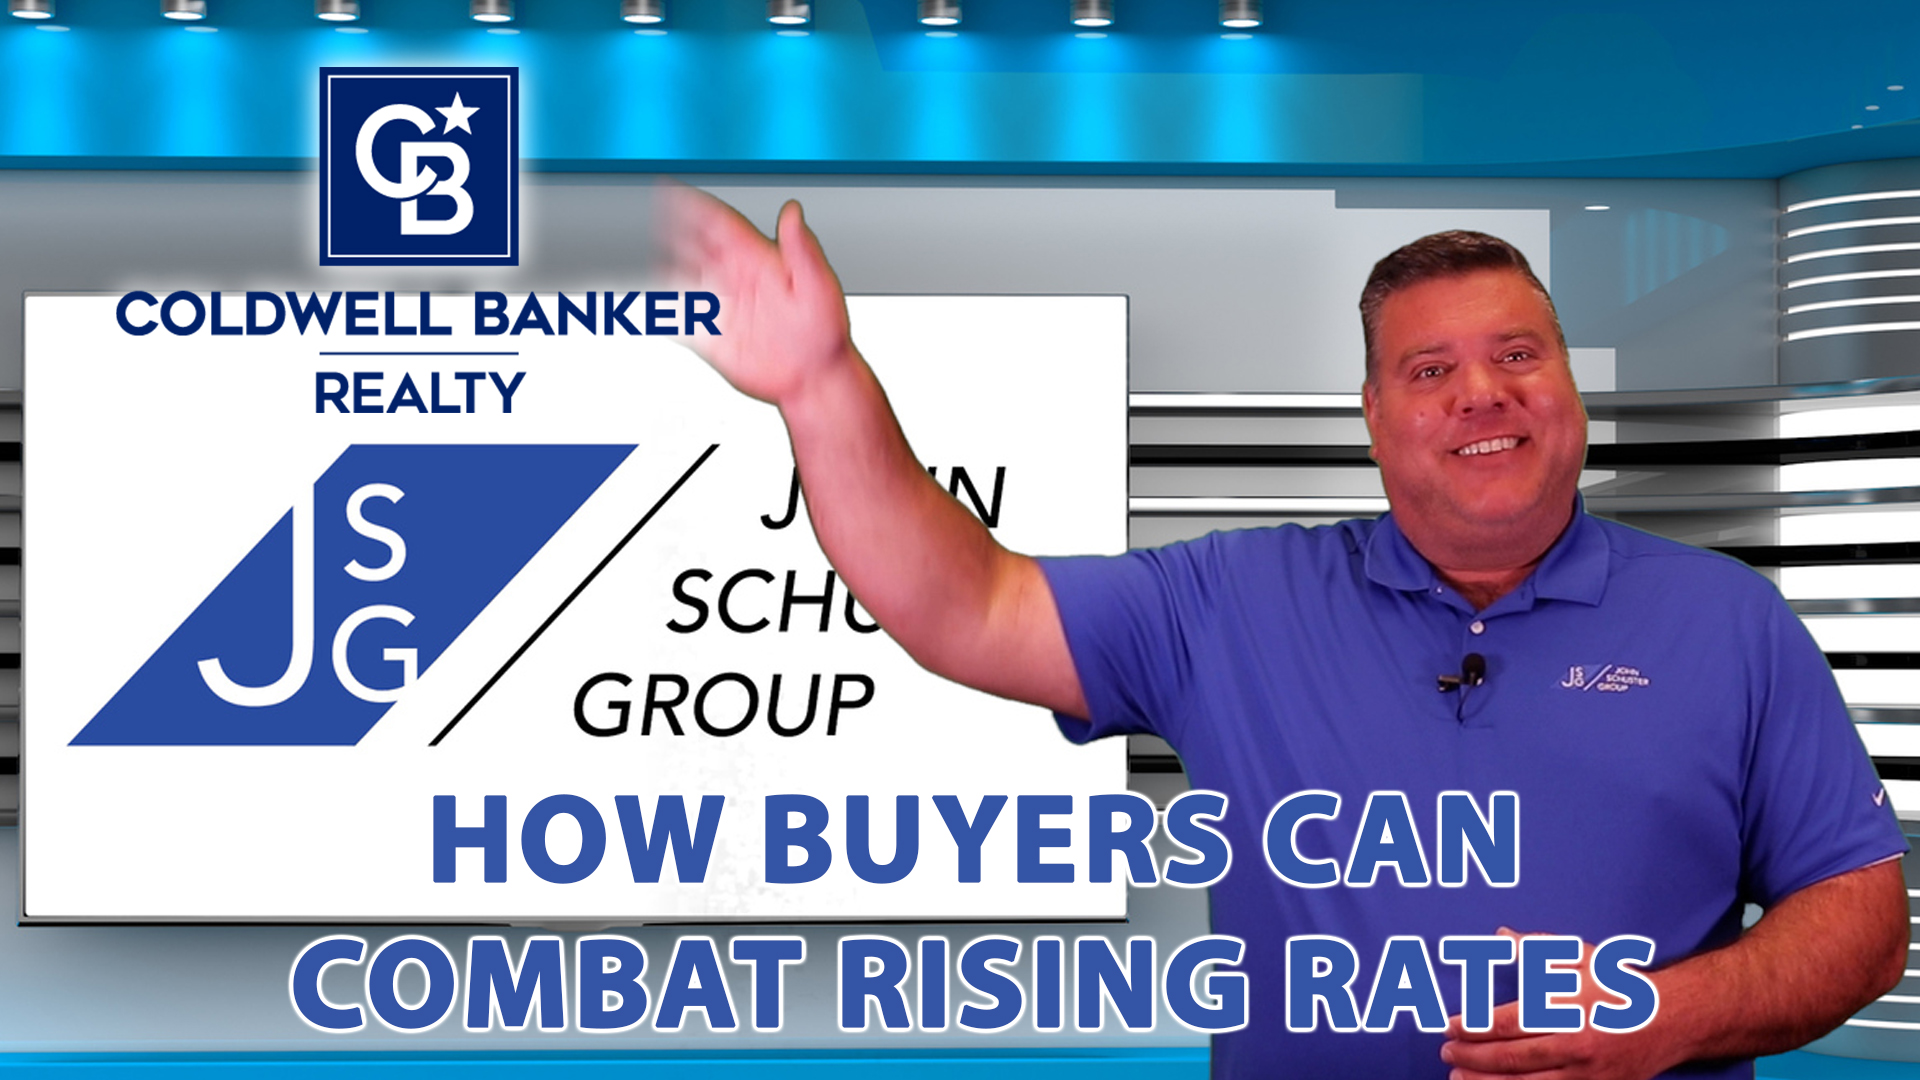 An Easy Way Buyers Can Beat Higher Rates